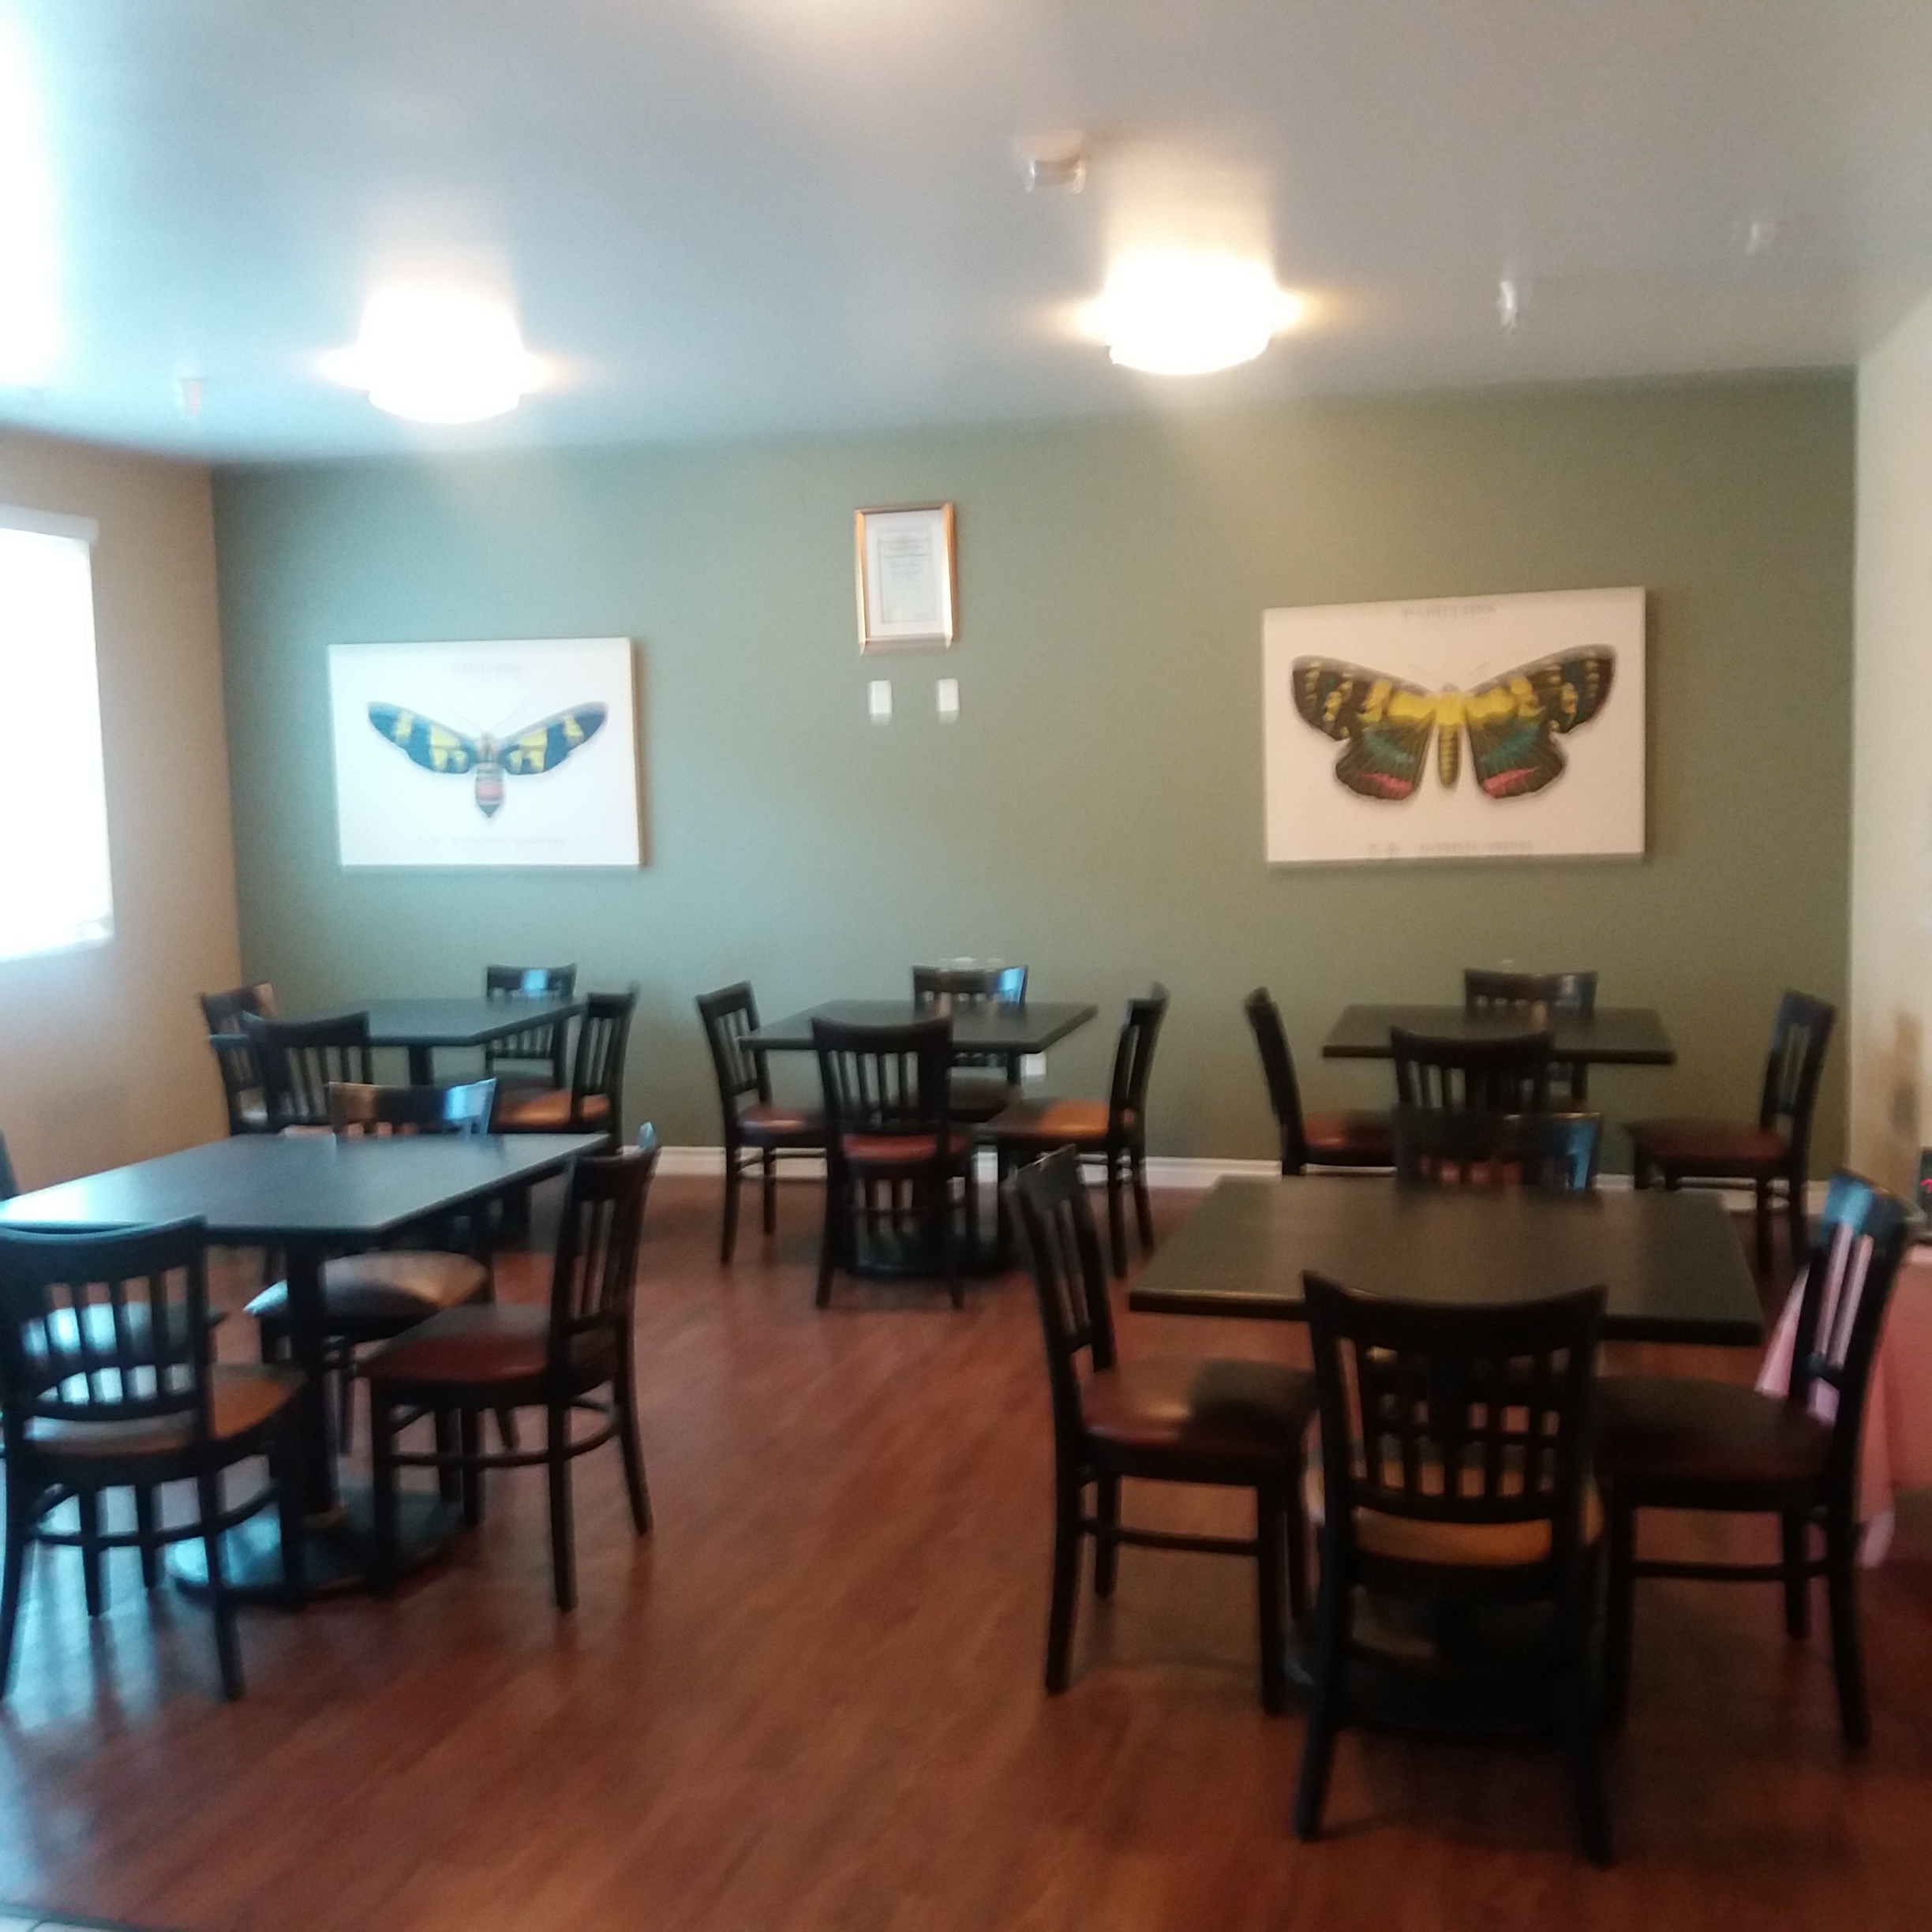 Community room with multiple four seat dining tables. There are two butterfly art pieces on the wall, and the flooring is wood.